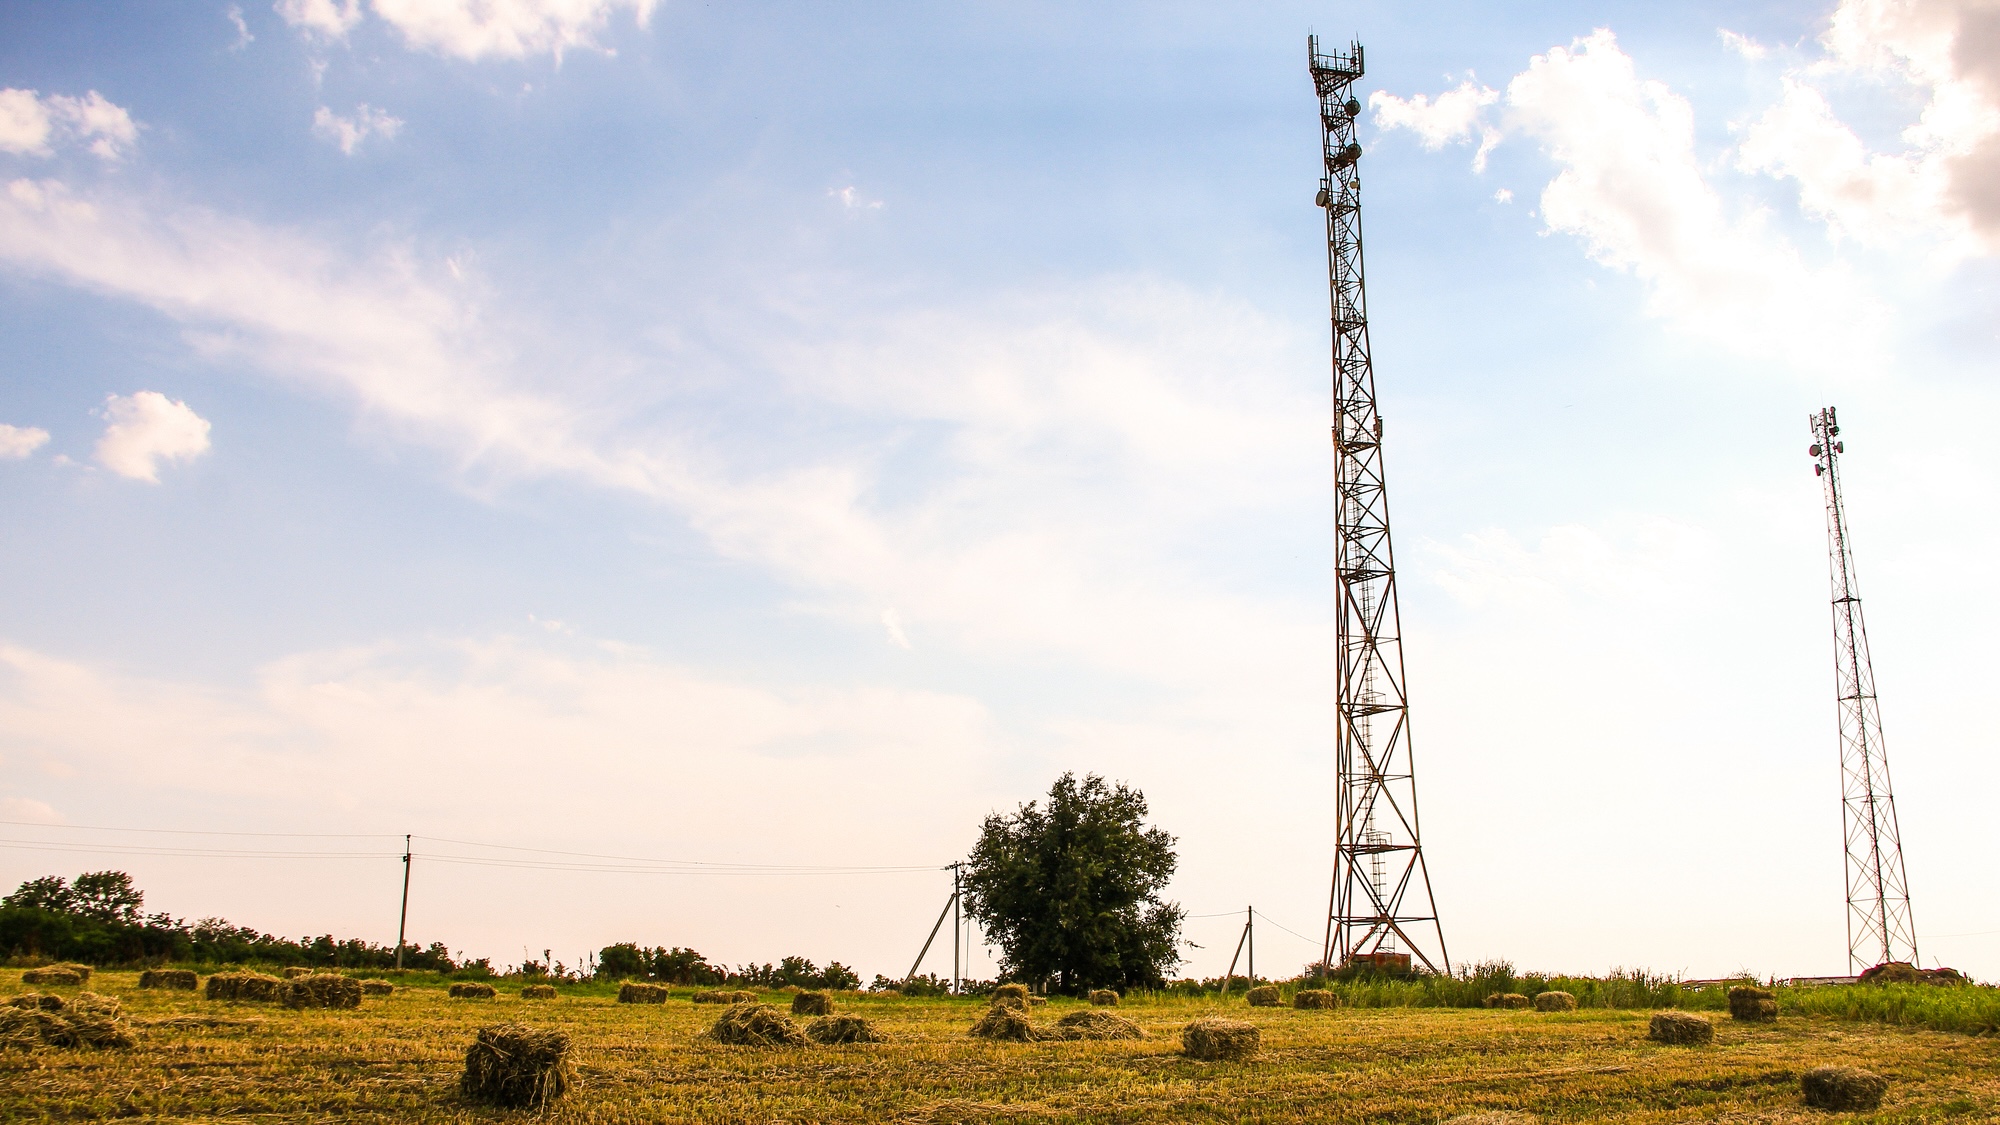 Many rural areas could soon lose cell service